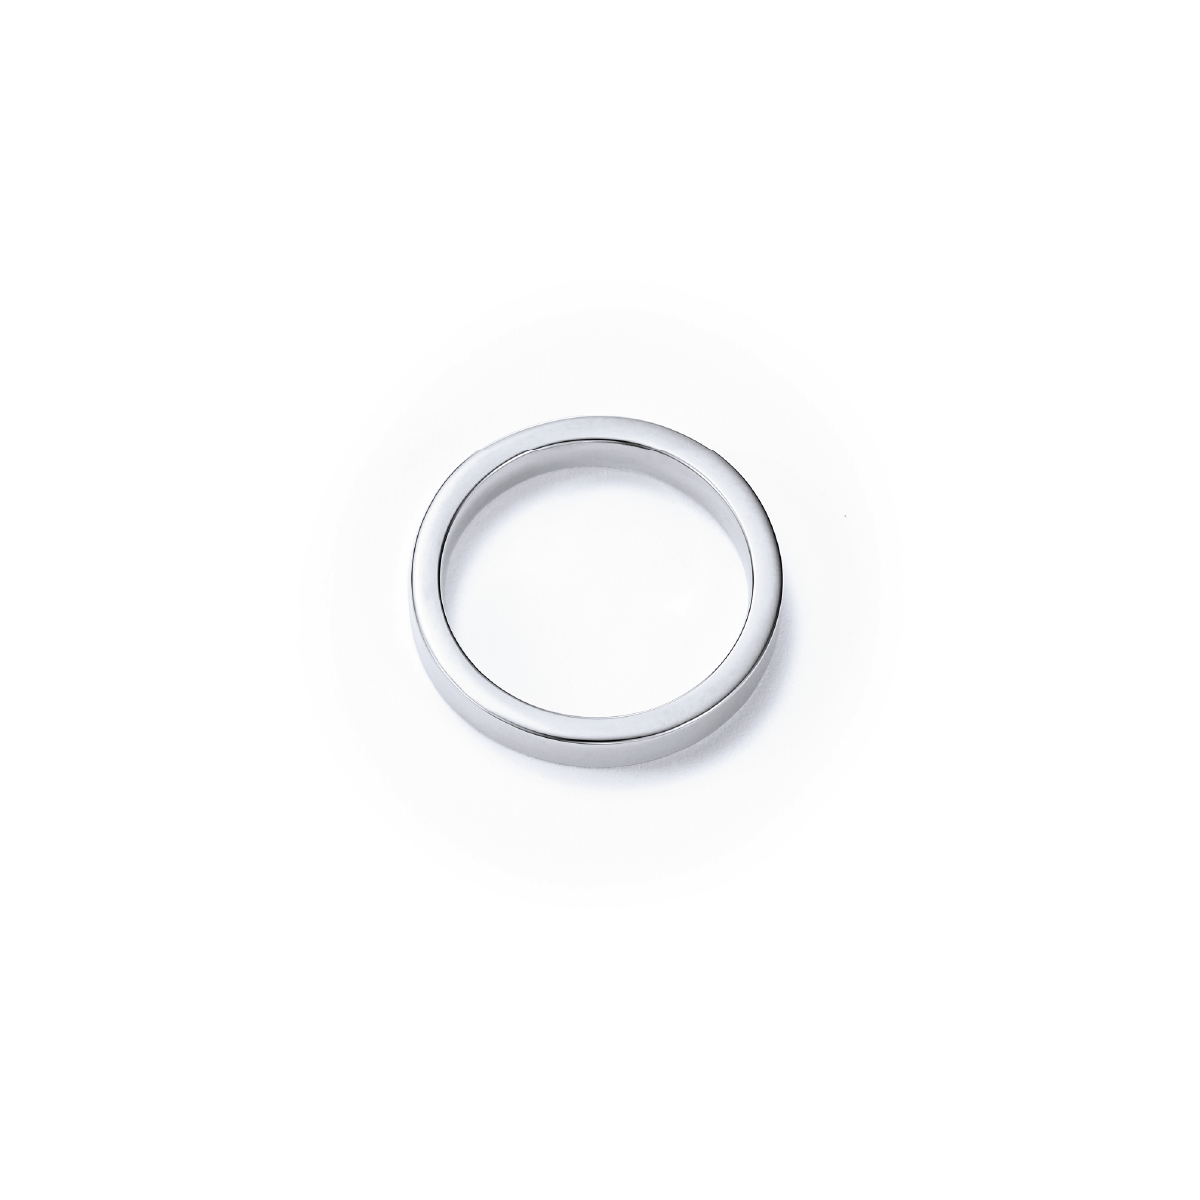 Sustainable White Gold Wedding Band - Top View